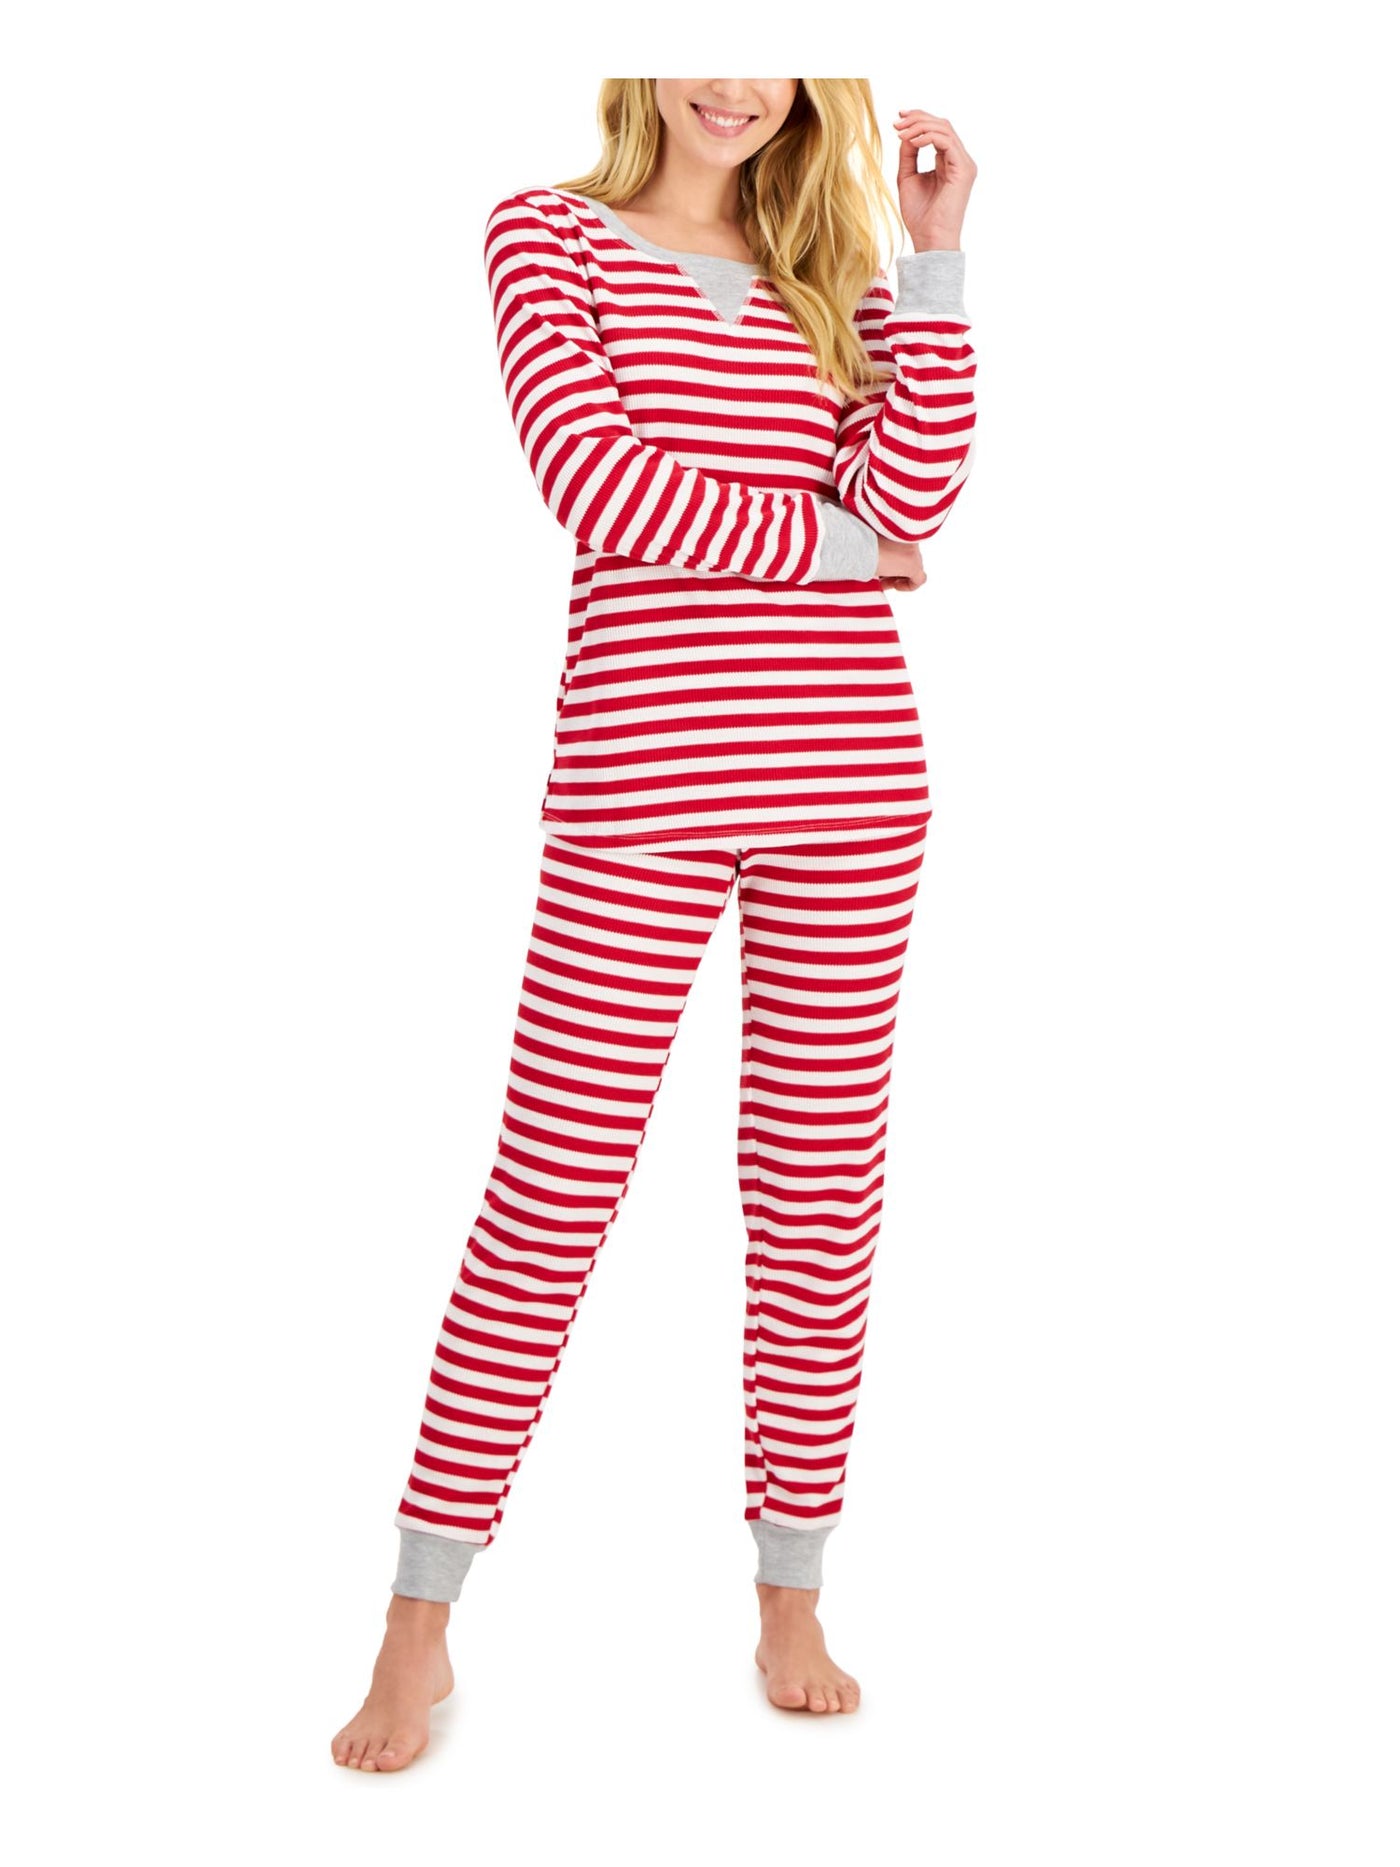 FAMILY PJs Womens Red Striped Top Ribbed Long Sleeve Cuffed Pants Pajamas M